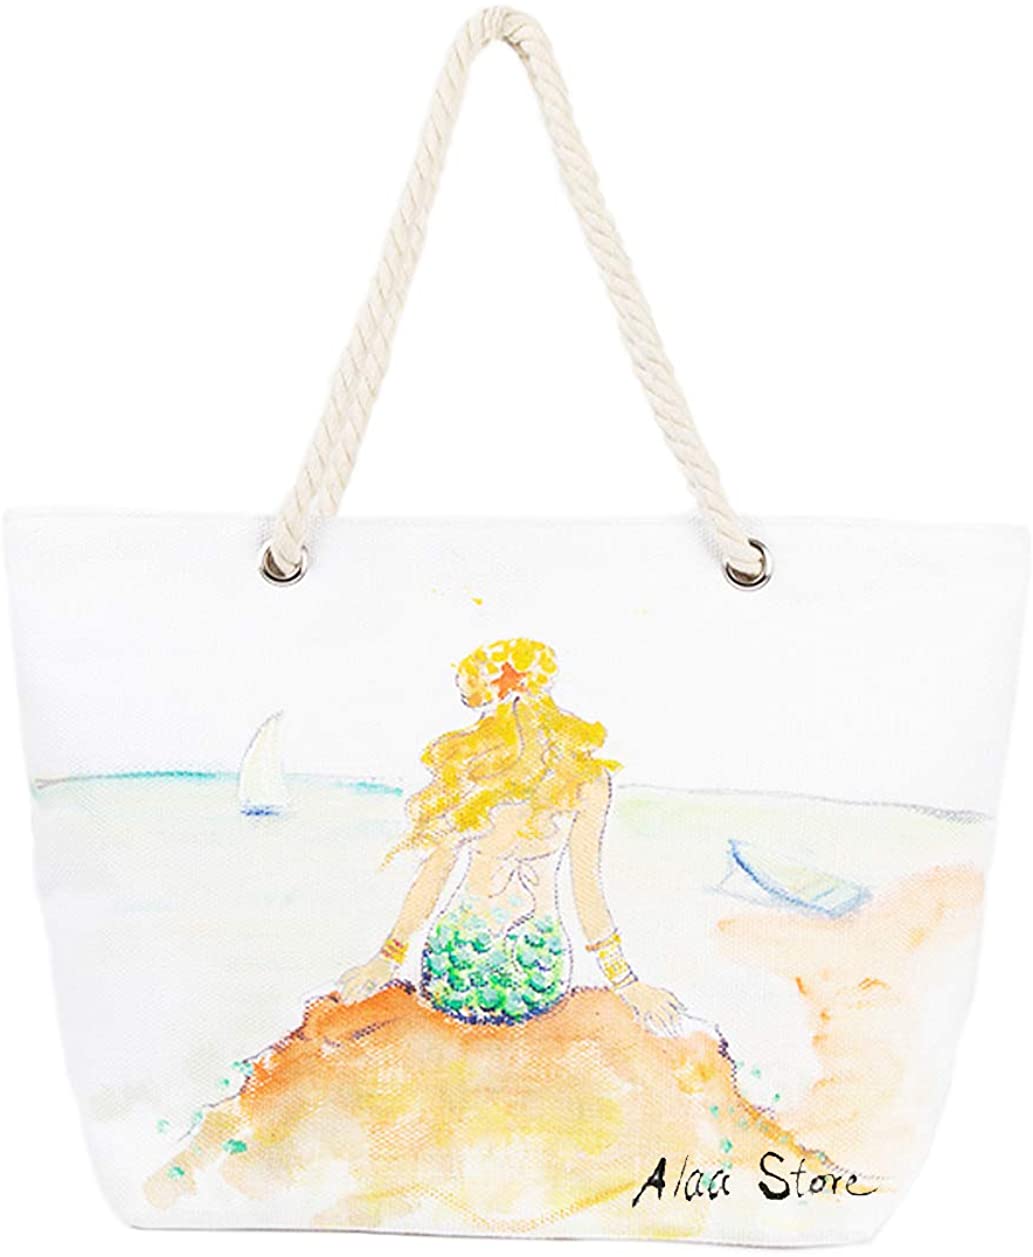 Price:$36.99    alaa Store Tote Beach Bag Large from Papyrus with Zipper, Rope Handles (Style 1)  Clothing